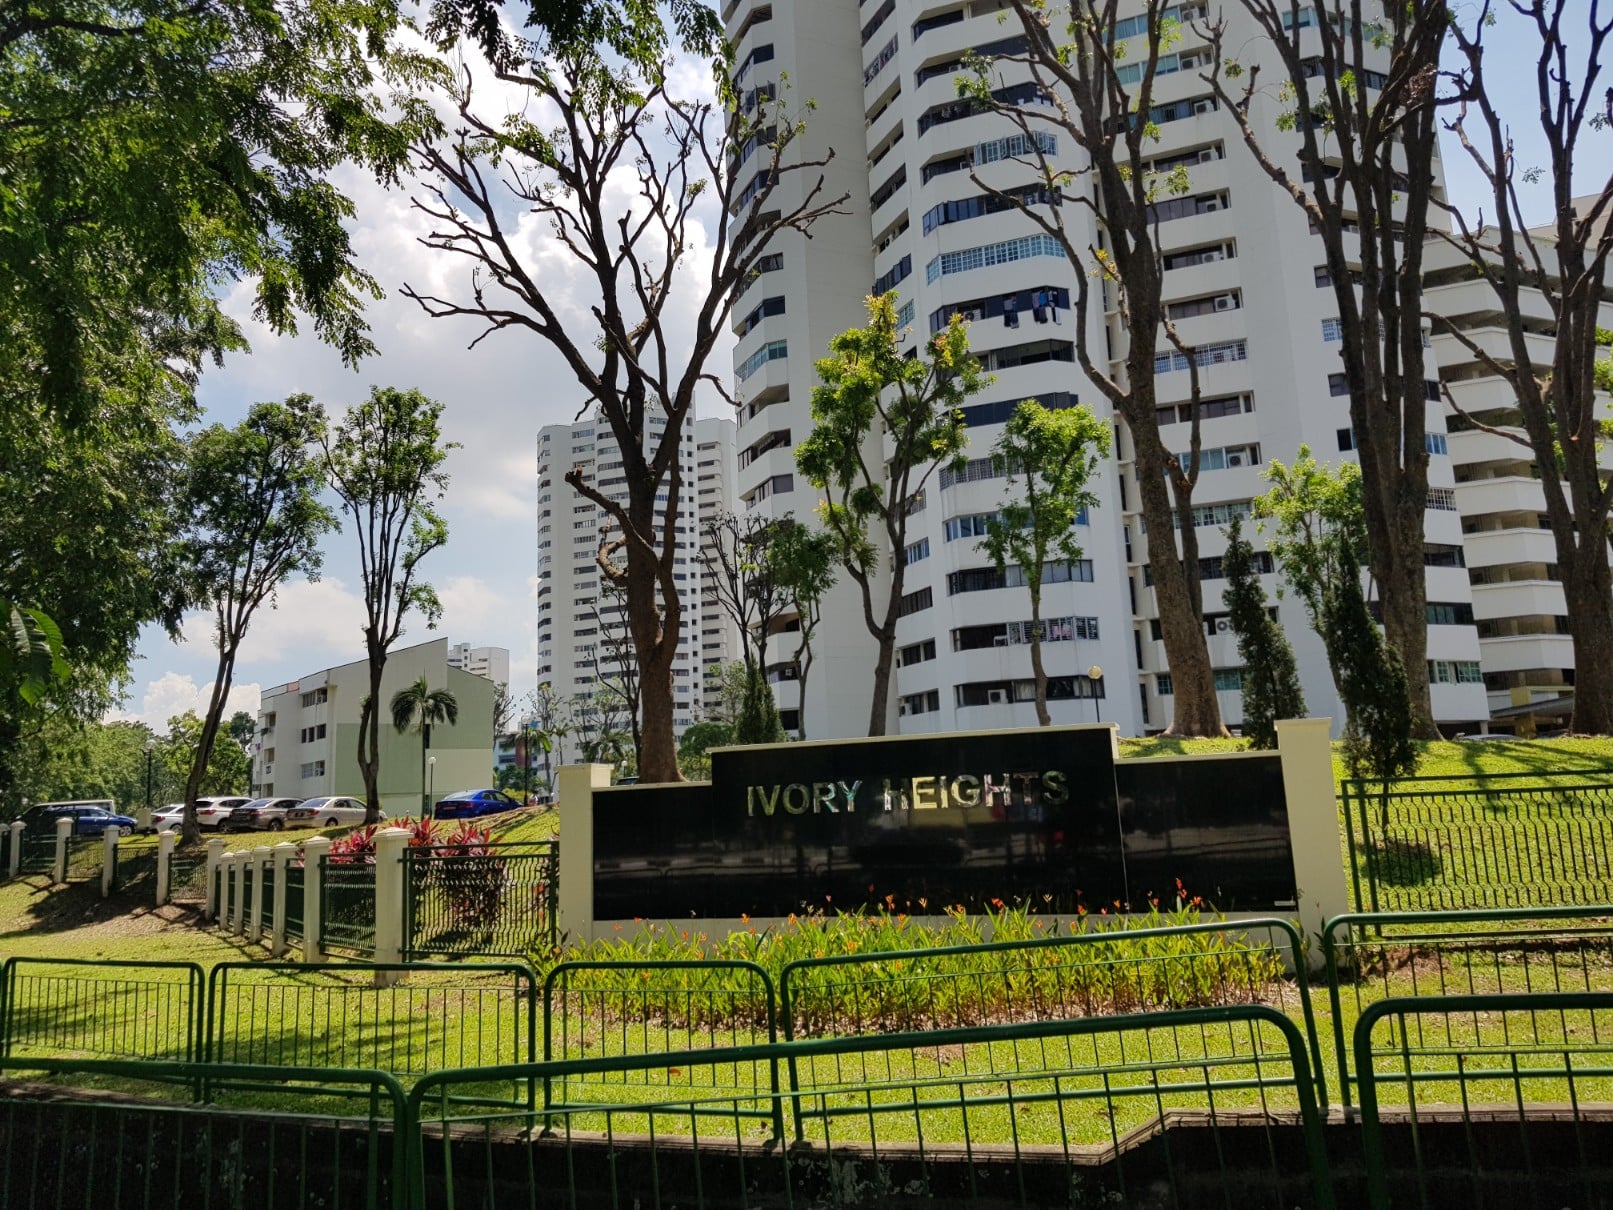 Ivory heights stacked homes en bloc potential